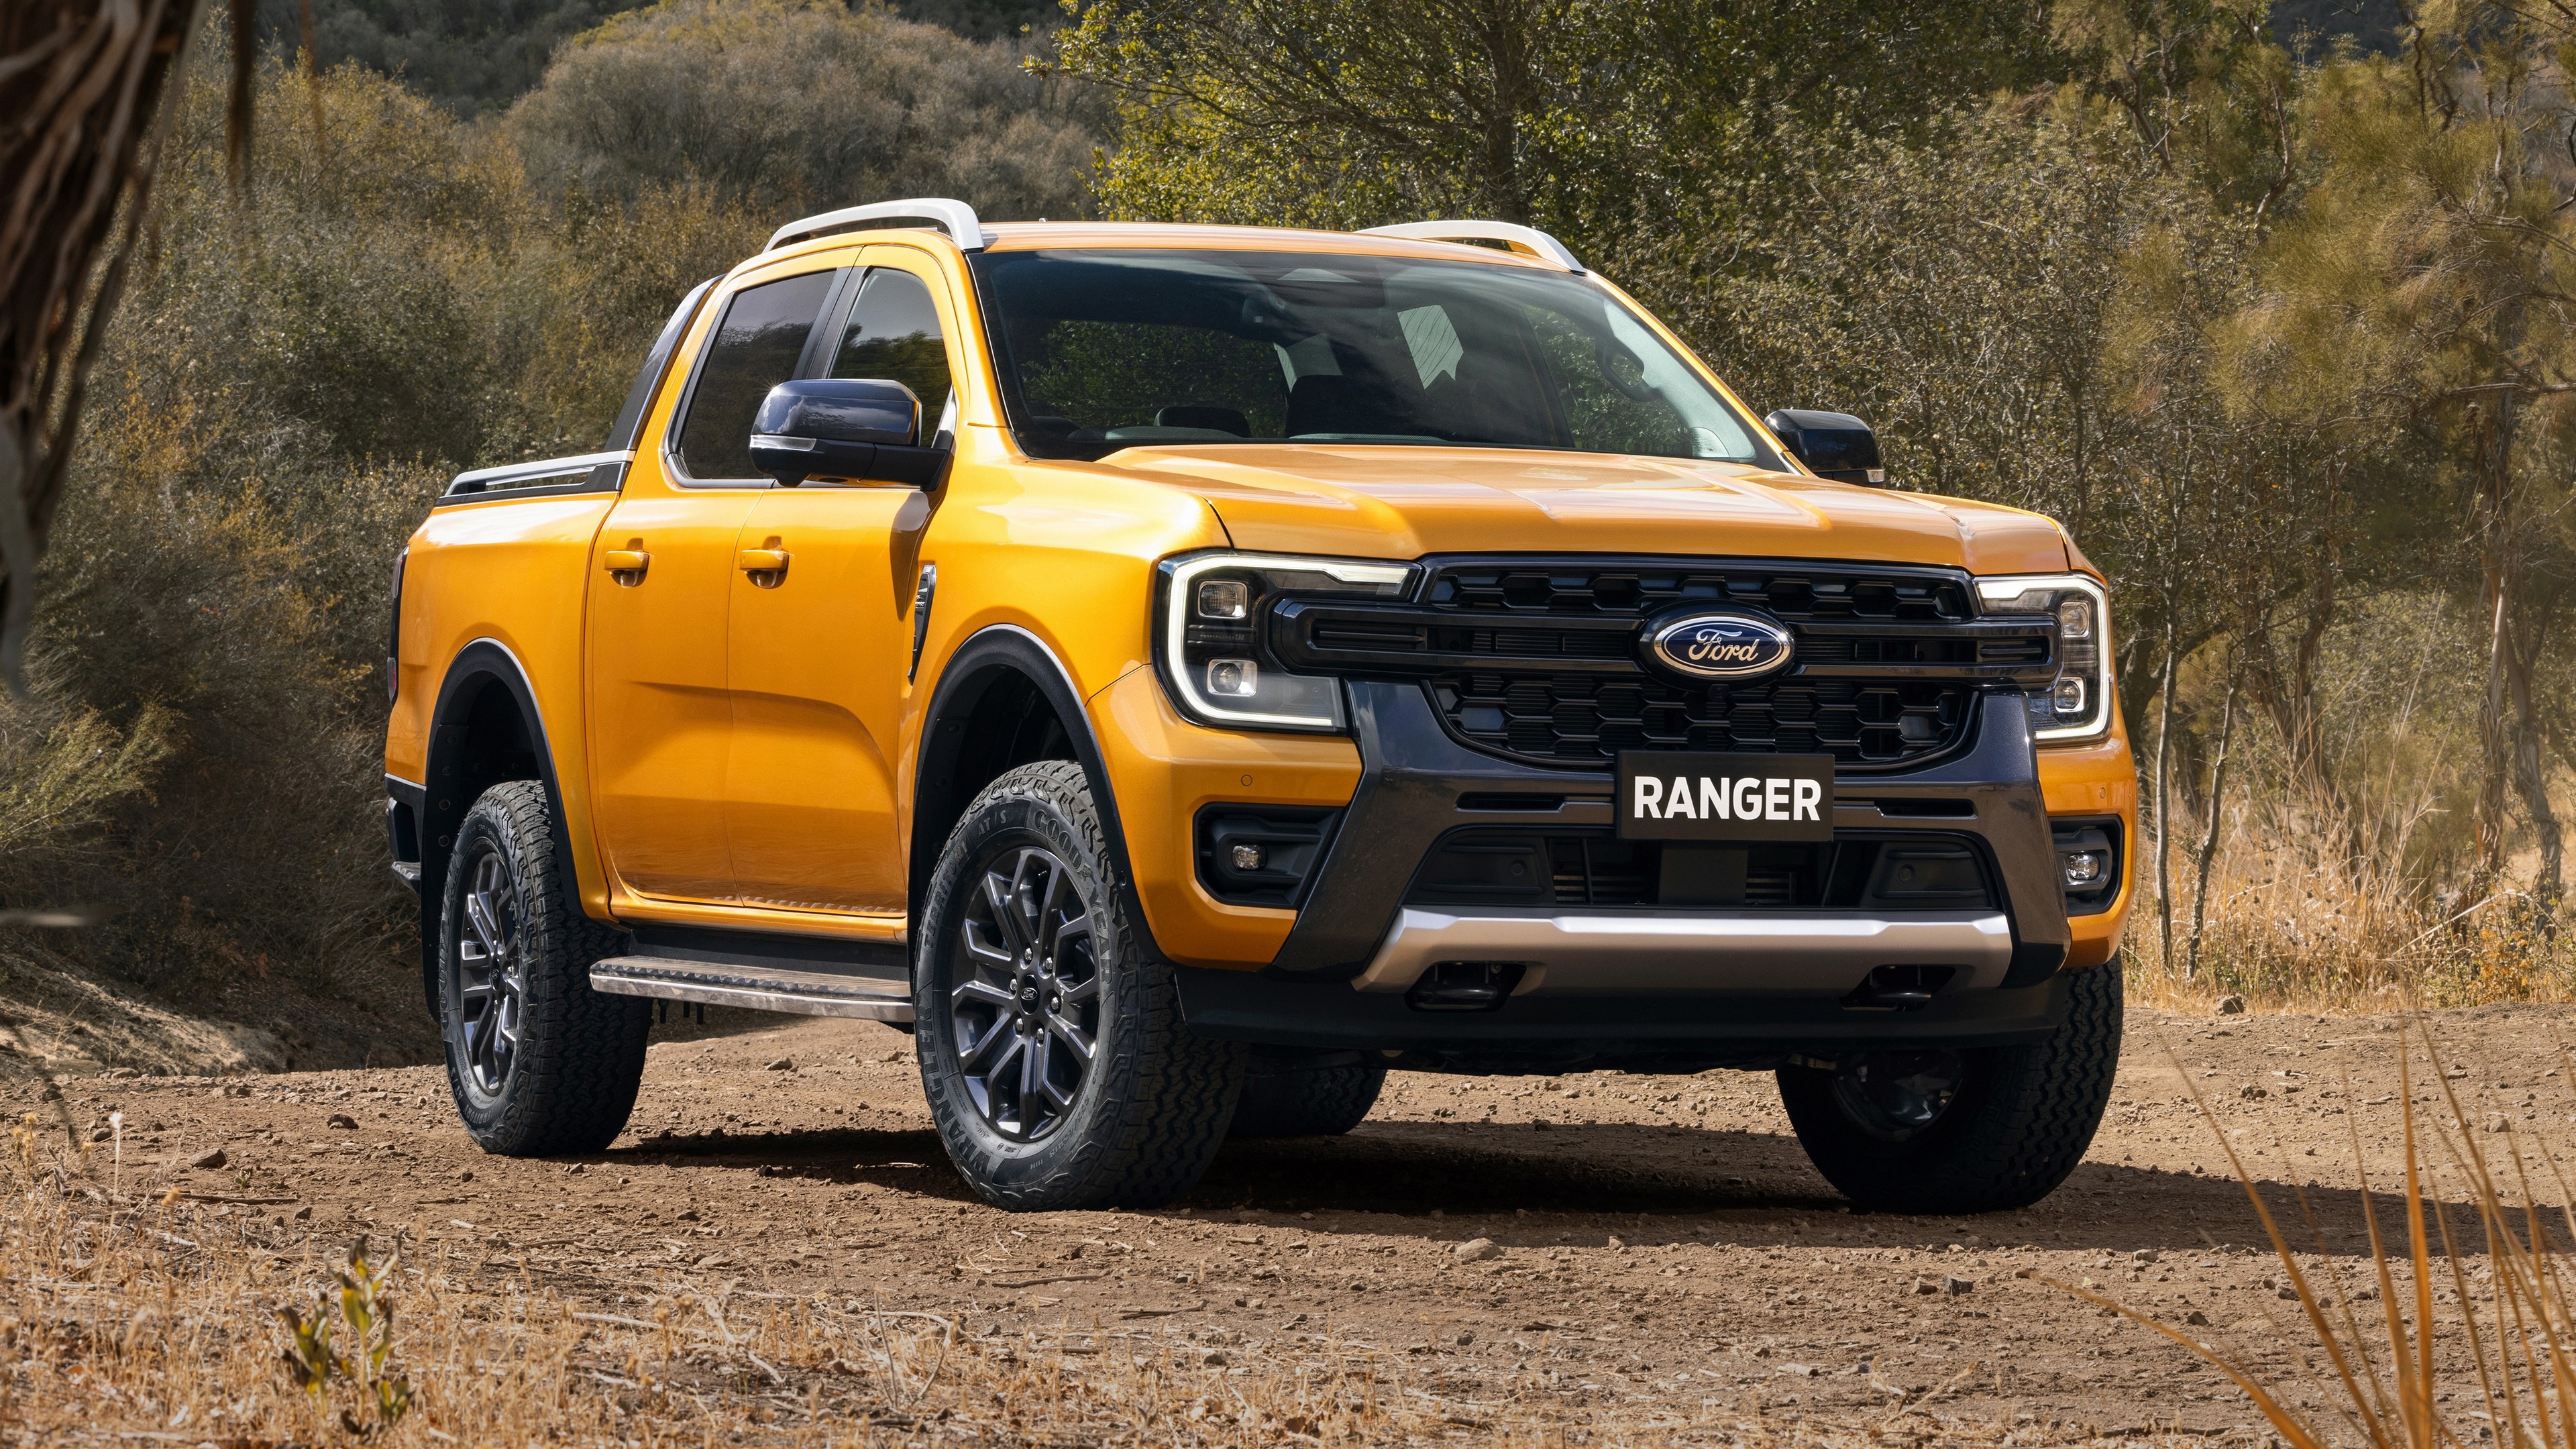 General 3840x2160 Ford Ford Ranger car yellow cars offroad pickup trucks American cars vehicle